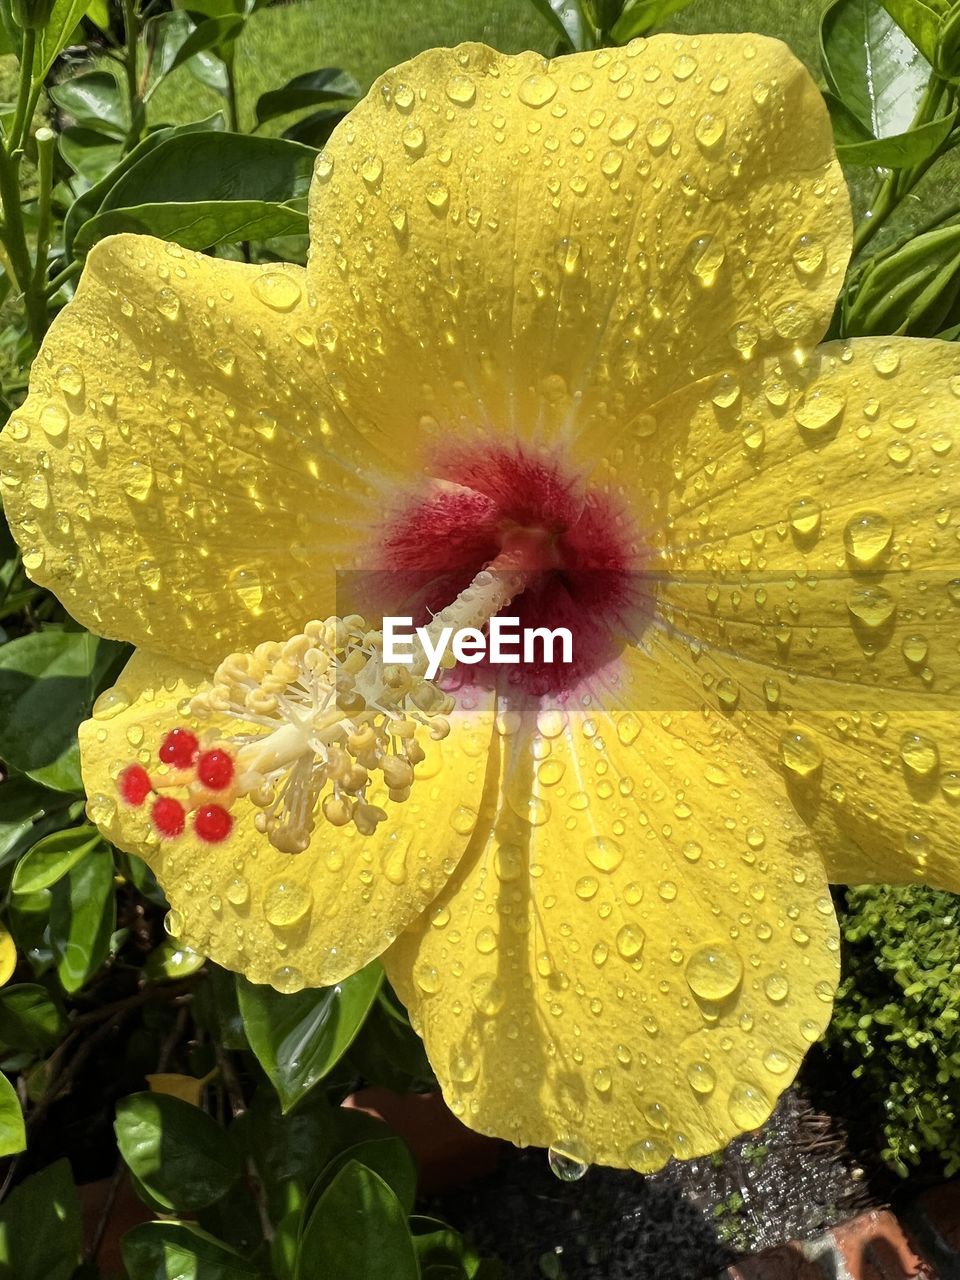 plant, flower, flowering plant, beauty in nature, growth, freshness, flower head, fragility, inflorescence, close-up, petal, drop, nature, wet, yellow, water, leaf, plant part, no people, pollen, hibiscus, outdoors, day, rain, botany, raindrop, springtime